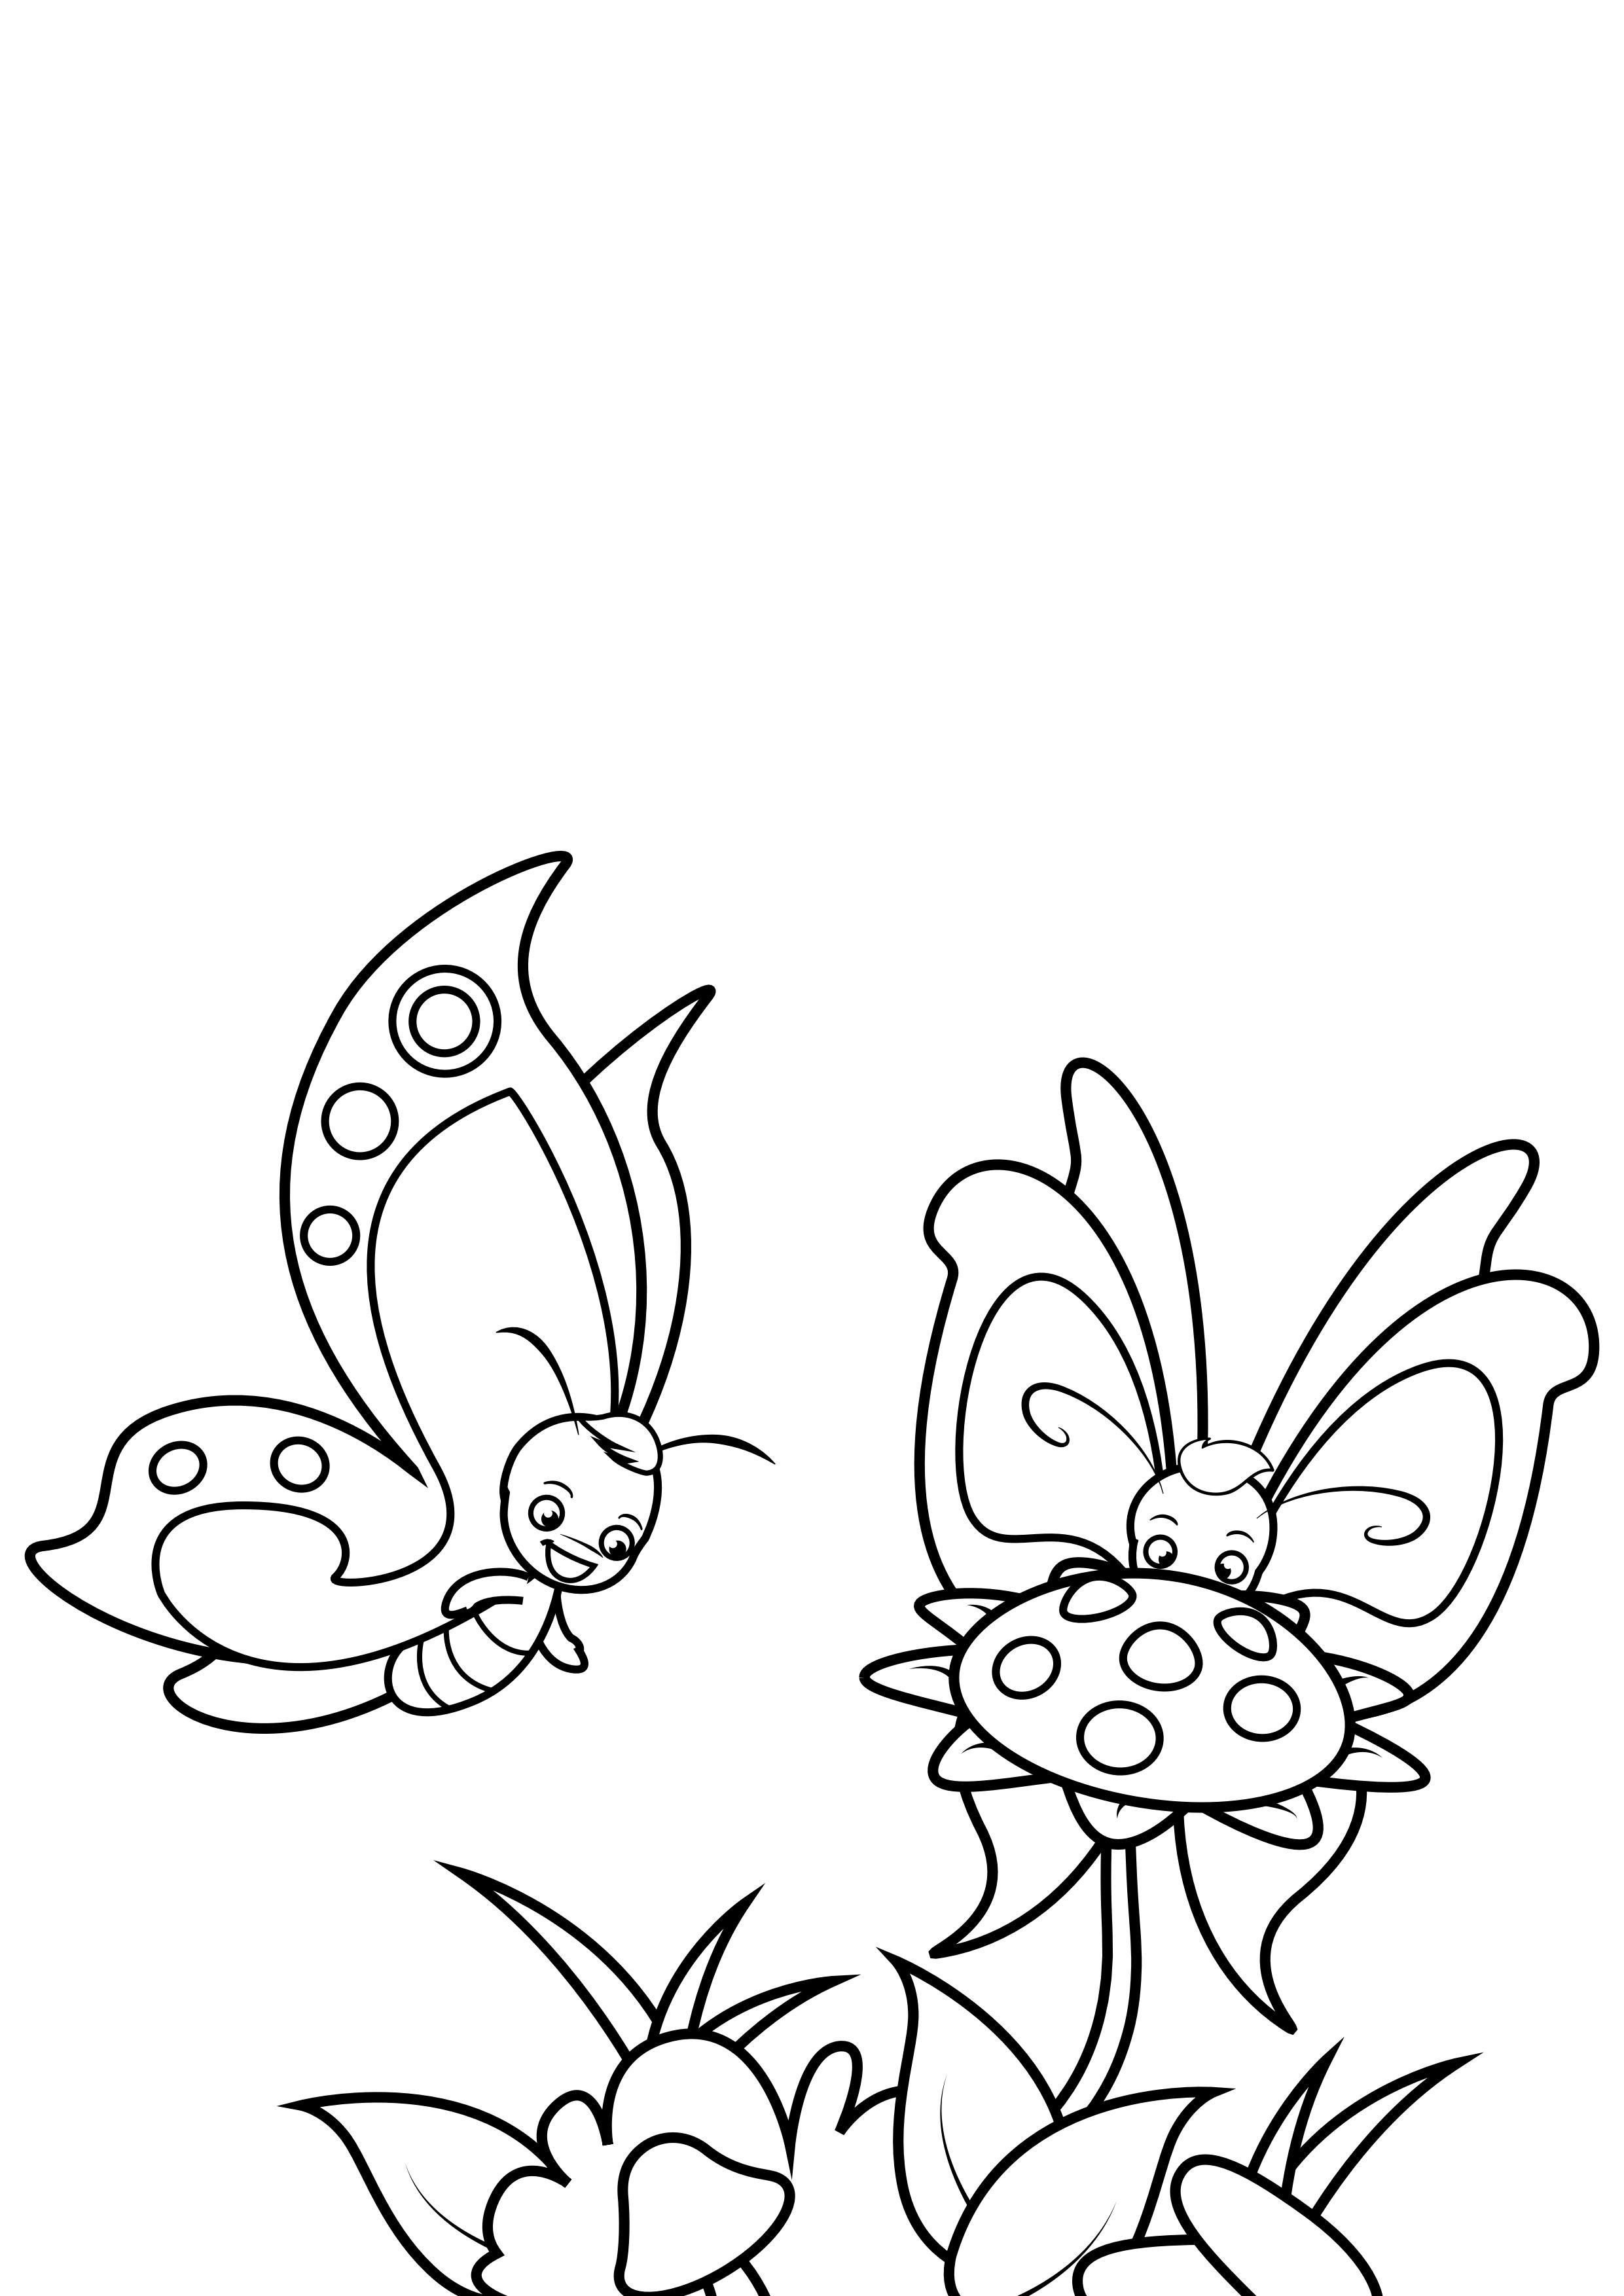 Coloring page butterfly with friend